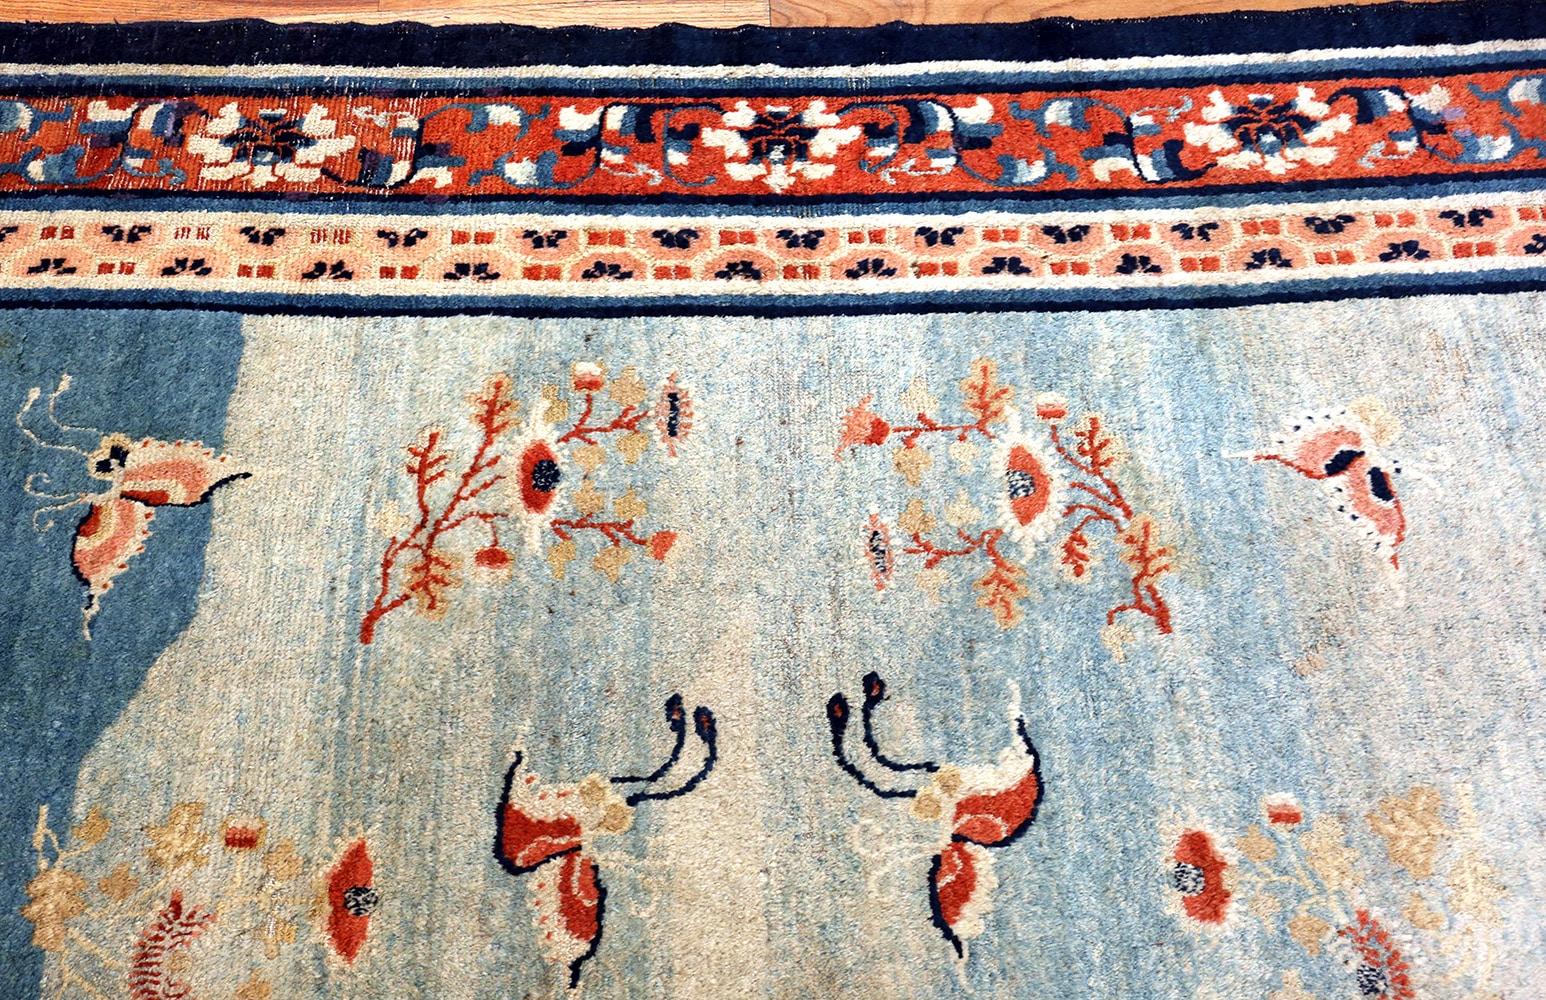 18th Century Kansu Carpet from China. Size: 9 ft 4 in x 14 ft 2 in 2